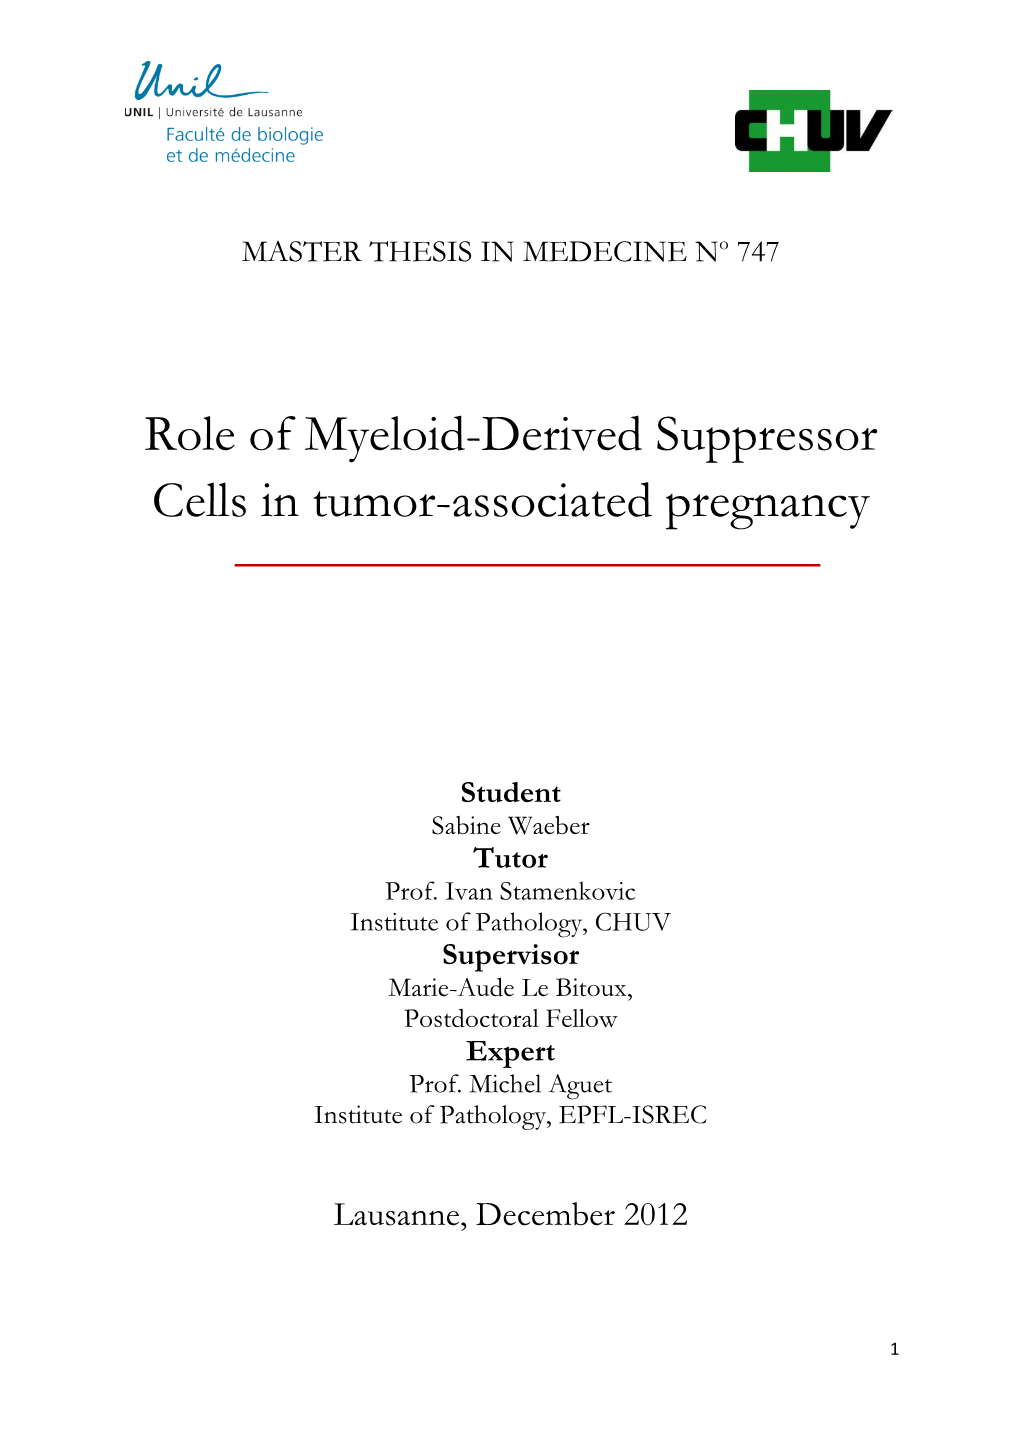 Role of Myeloid-Derived Suppressor Cells in Tumor-Associated Pregnancy